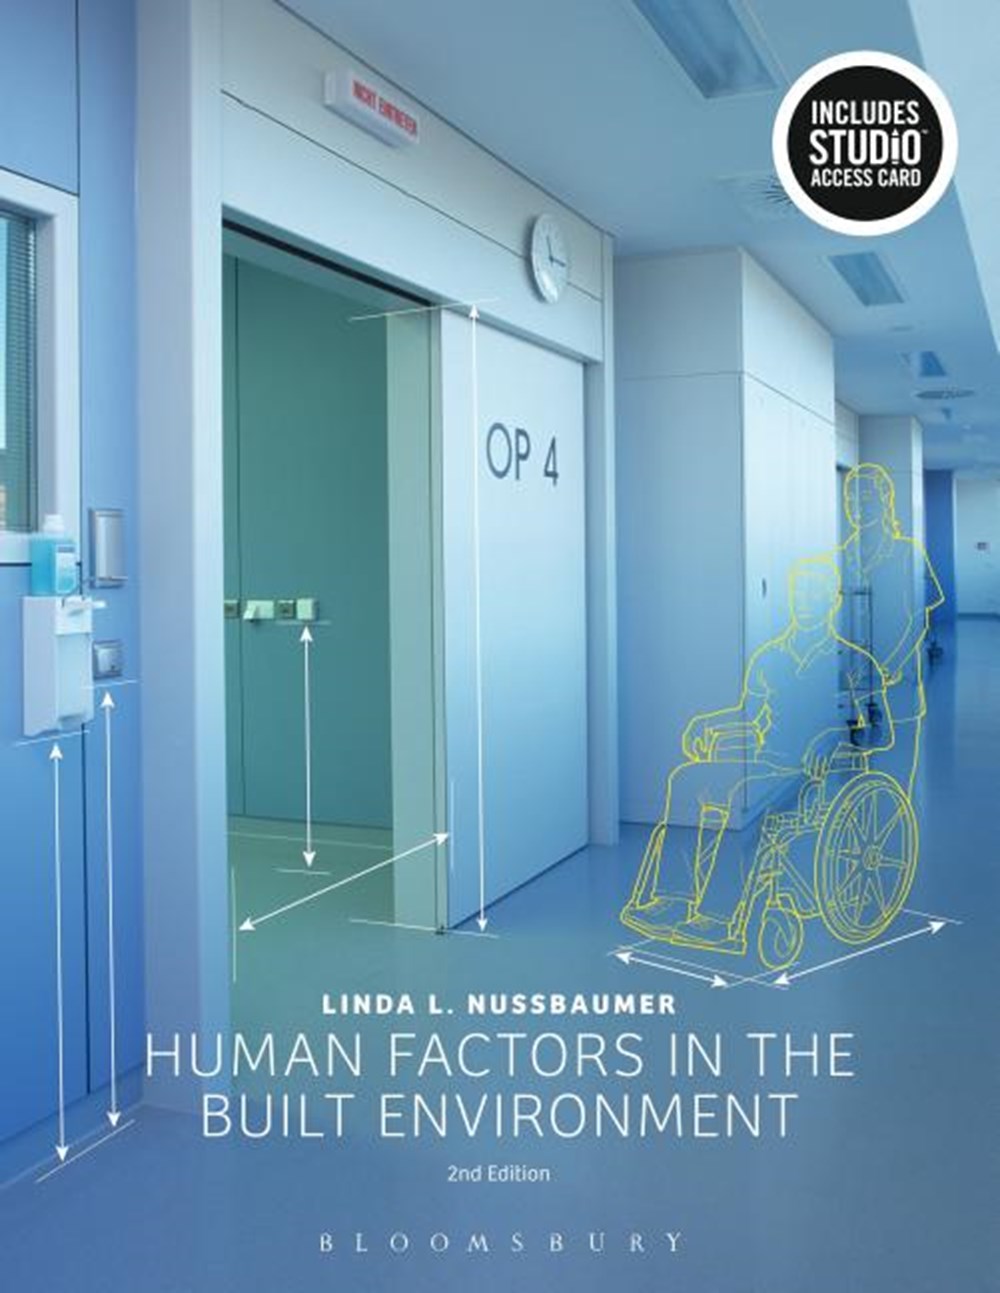 Human Factors in the Built Environment: Bundle Book + Studio Access Card [With Access Code]